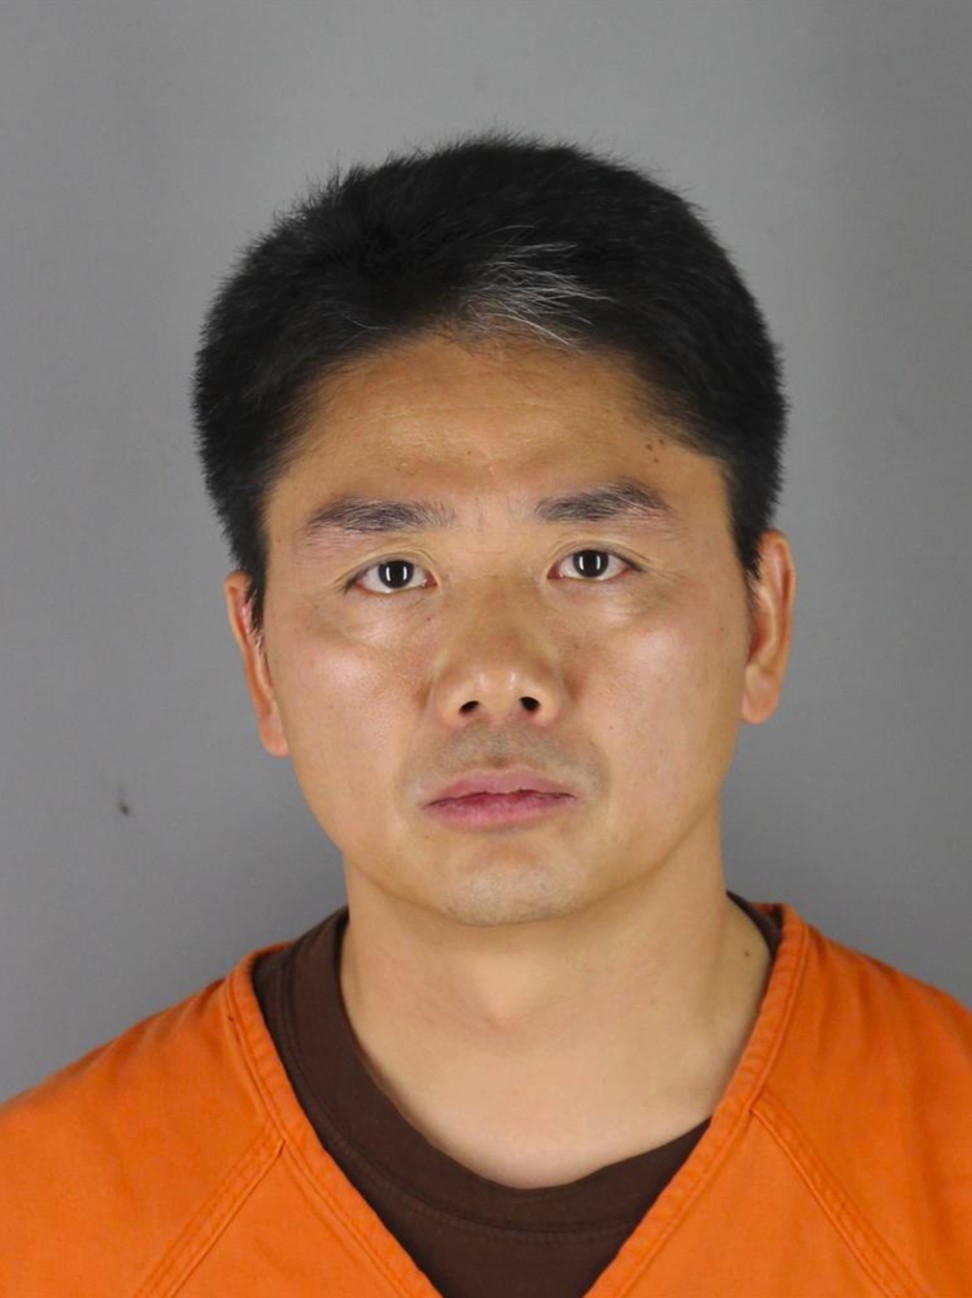 This 2018 photo provided by the Hennepin County Sheriff’s Office shows Chinese billionaire Richard Liu Qiangdong, the founder, chairman and chief executive of Beijing-based e-commerce company JD.com, who was arrested in Minneapolis on suspicion of criminal sexual conduct, jail records show. Photo: AP